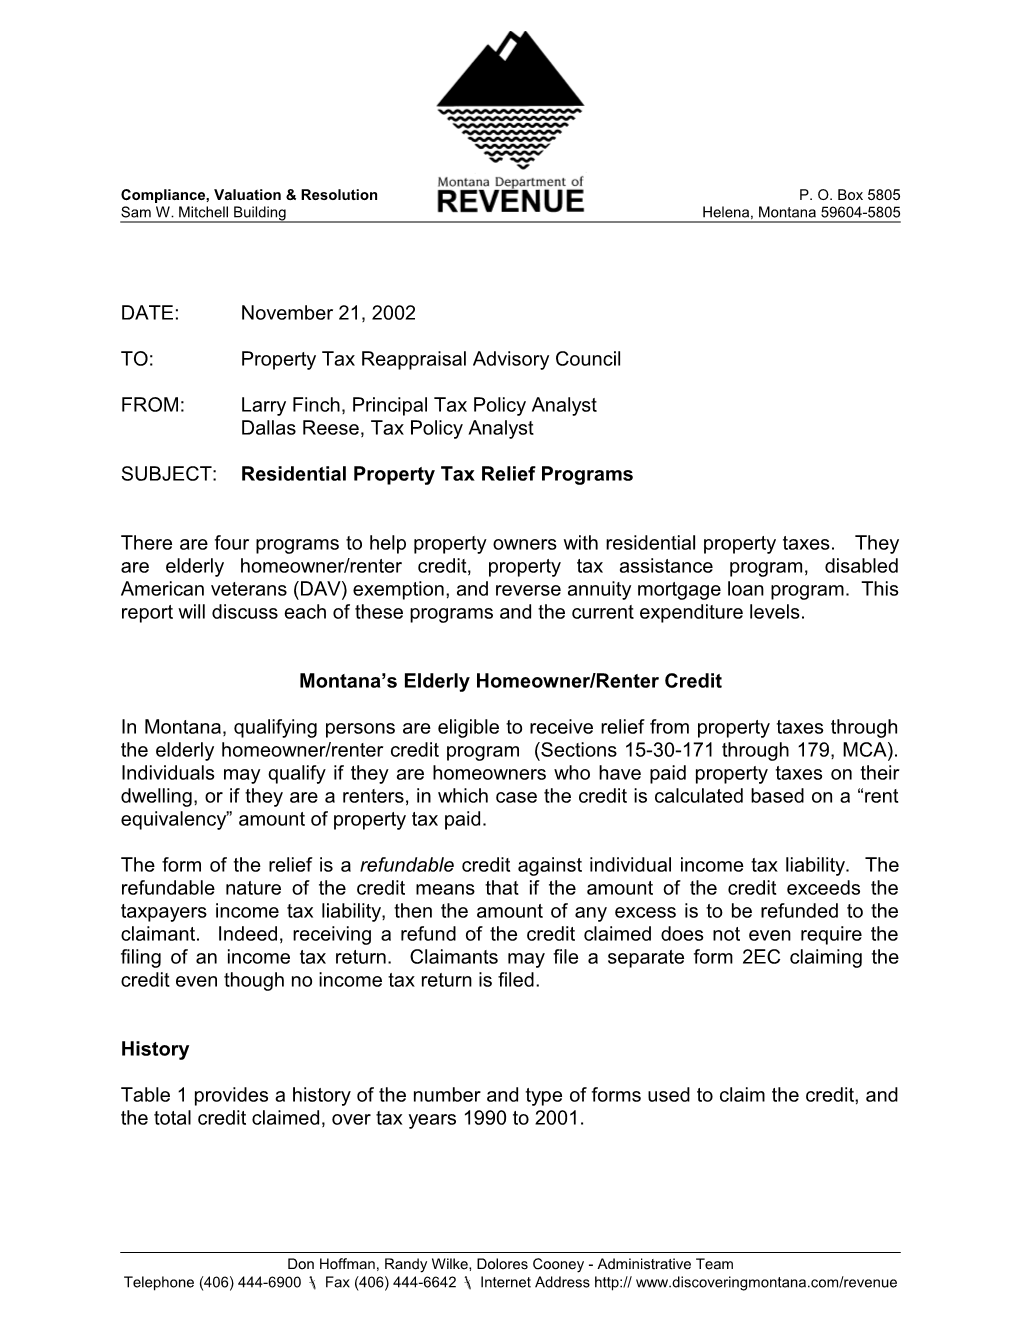 TO:Property Tax Reappraisal Advisory Council